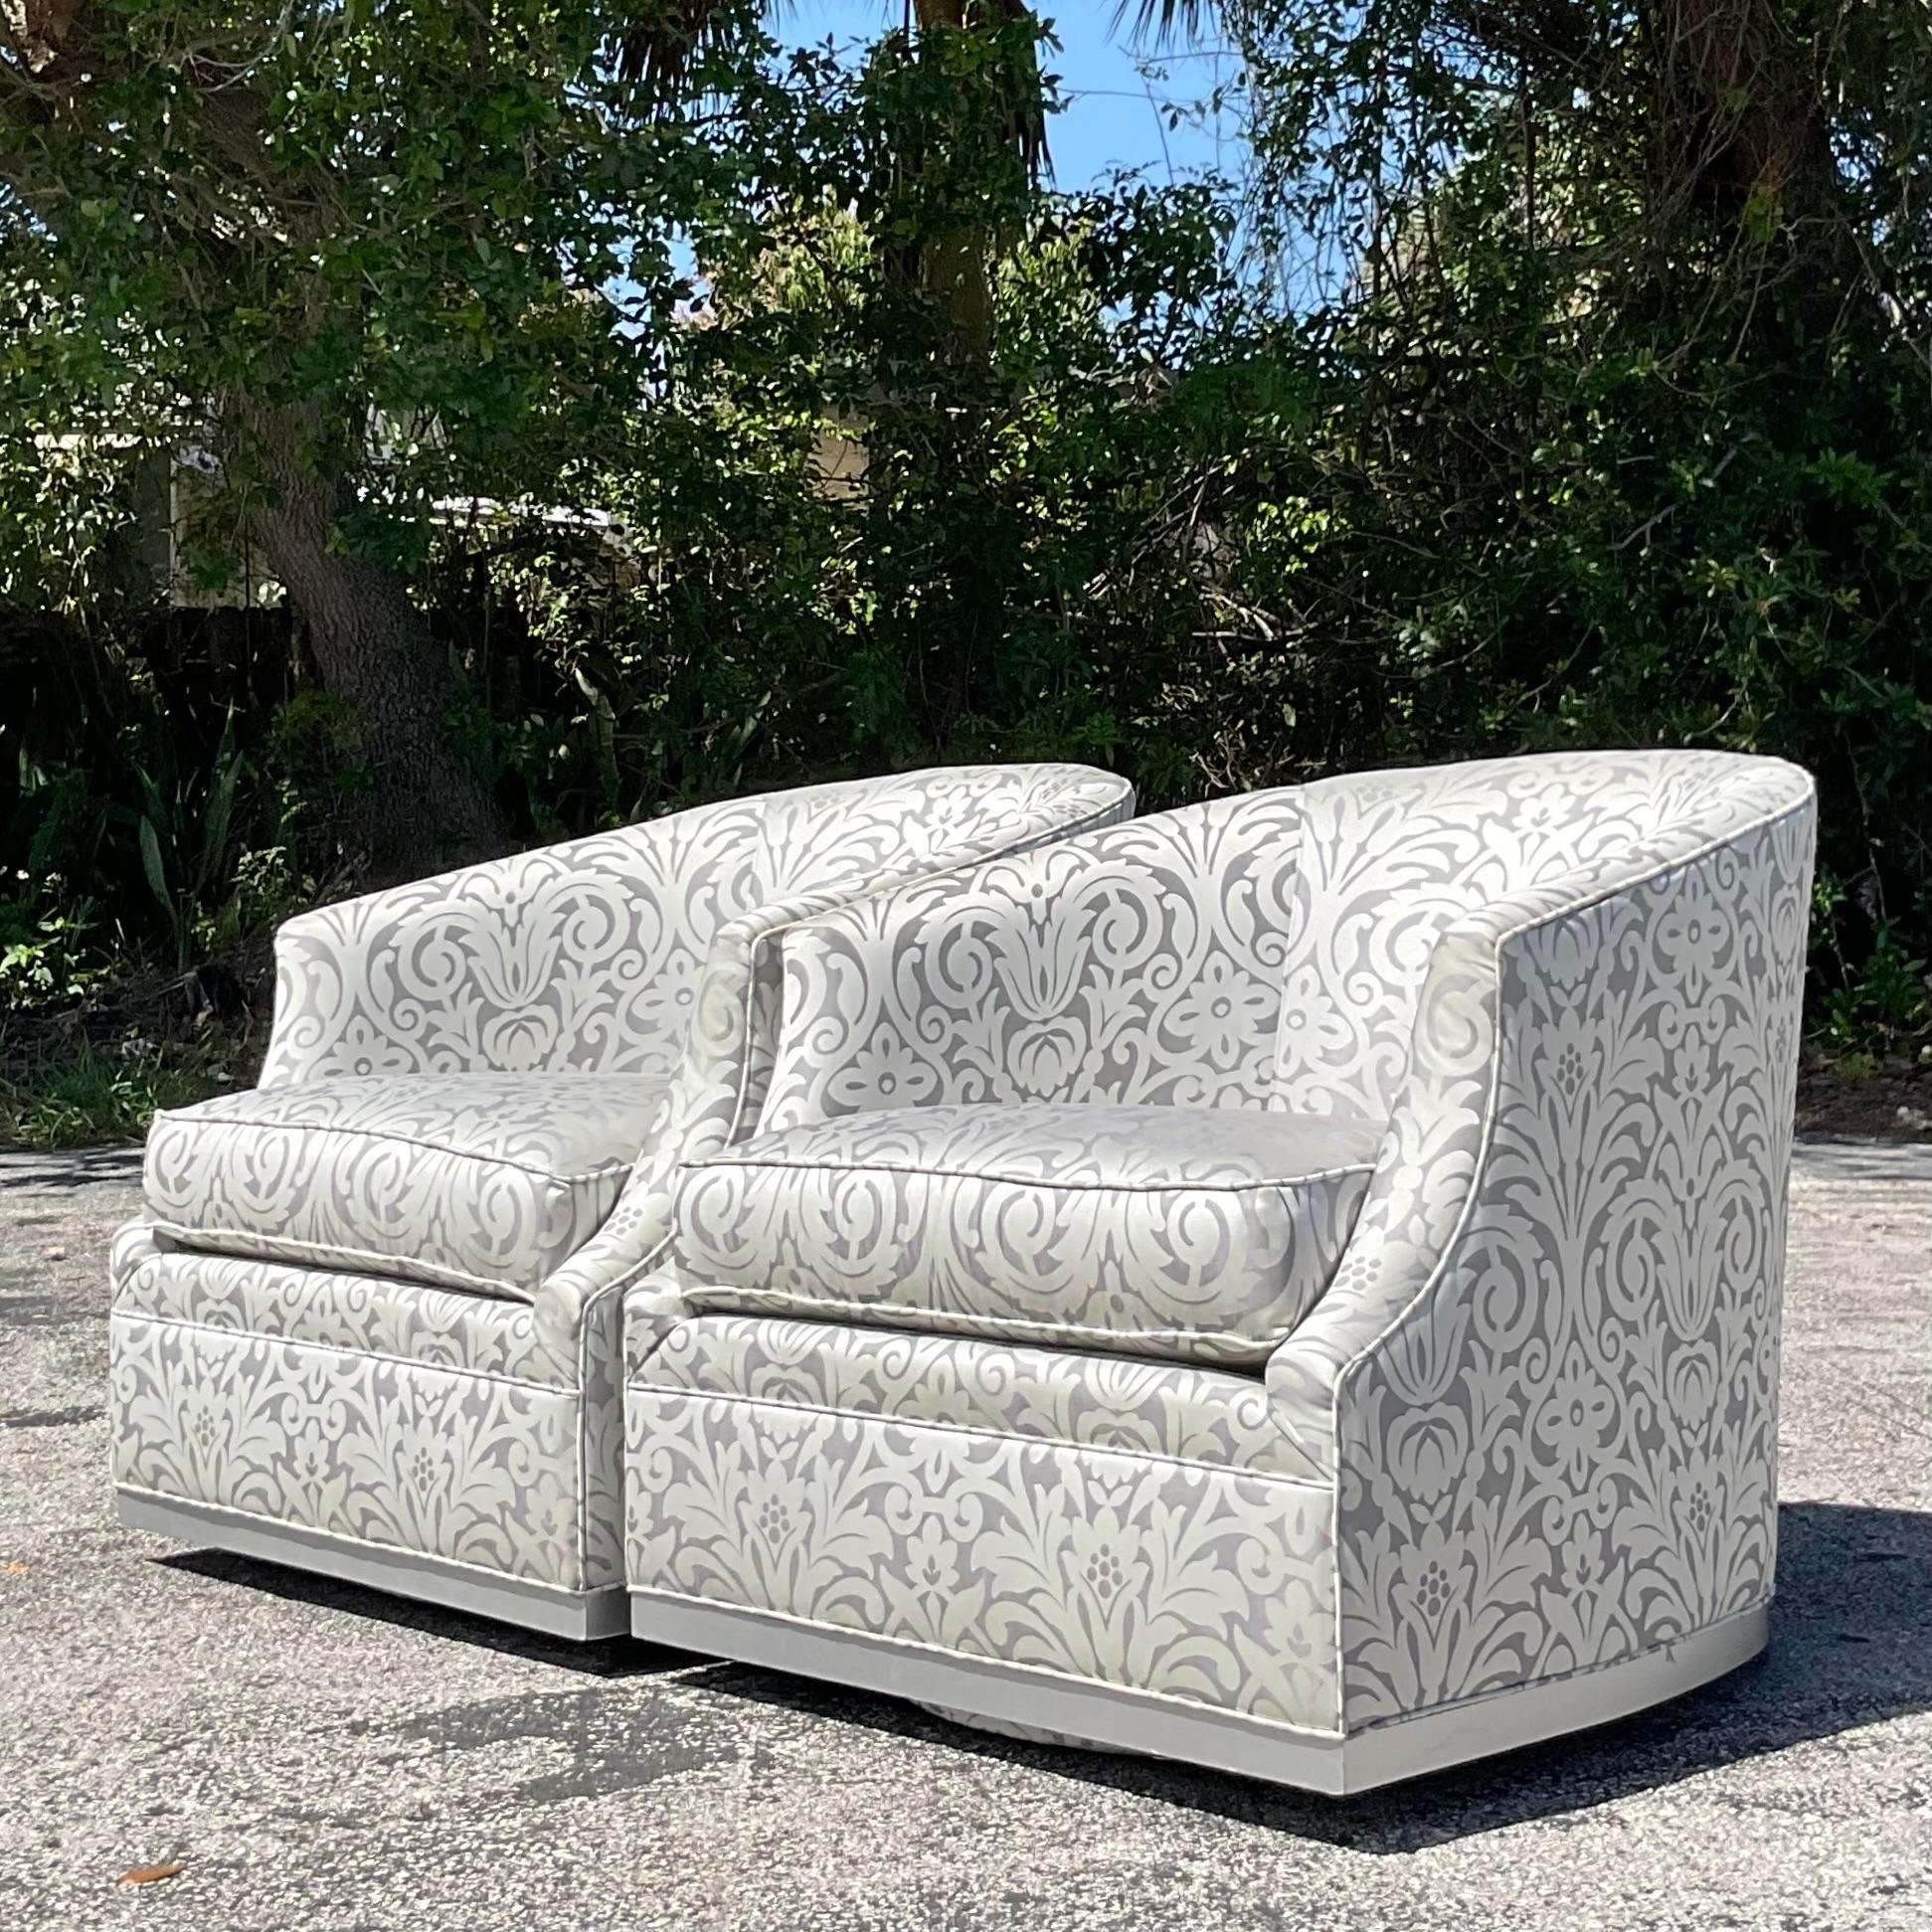 Vintage Boho Thomasville Metallic Jacquard Swivel Chairs In Good Condition For Sale In west palm beach, FL